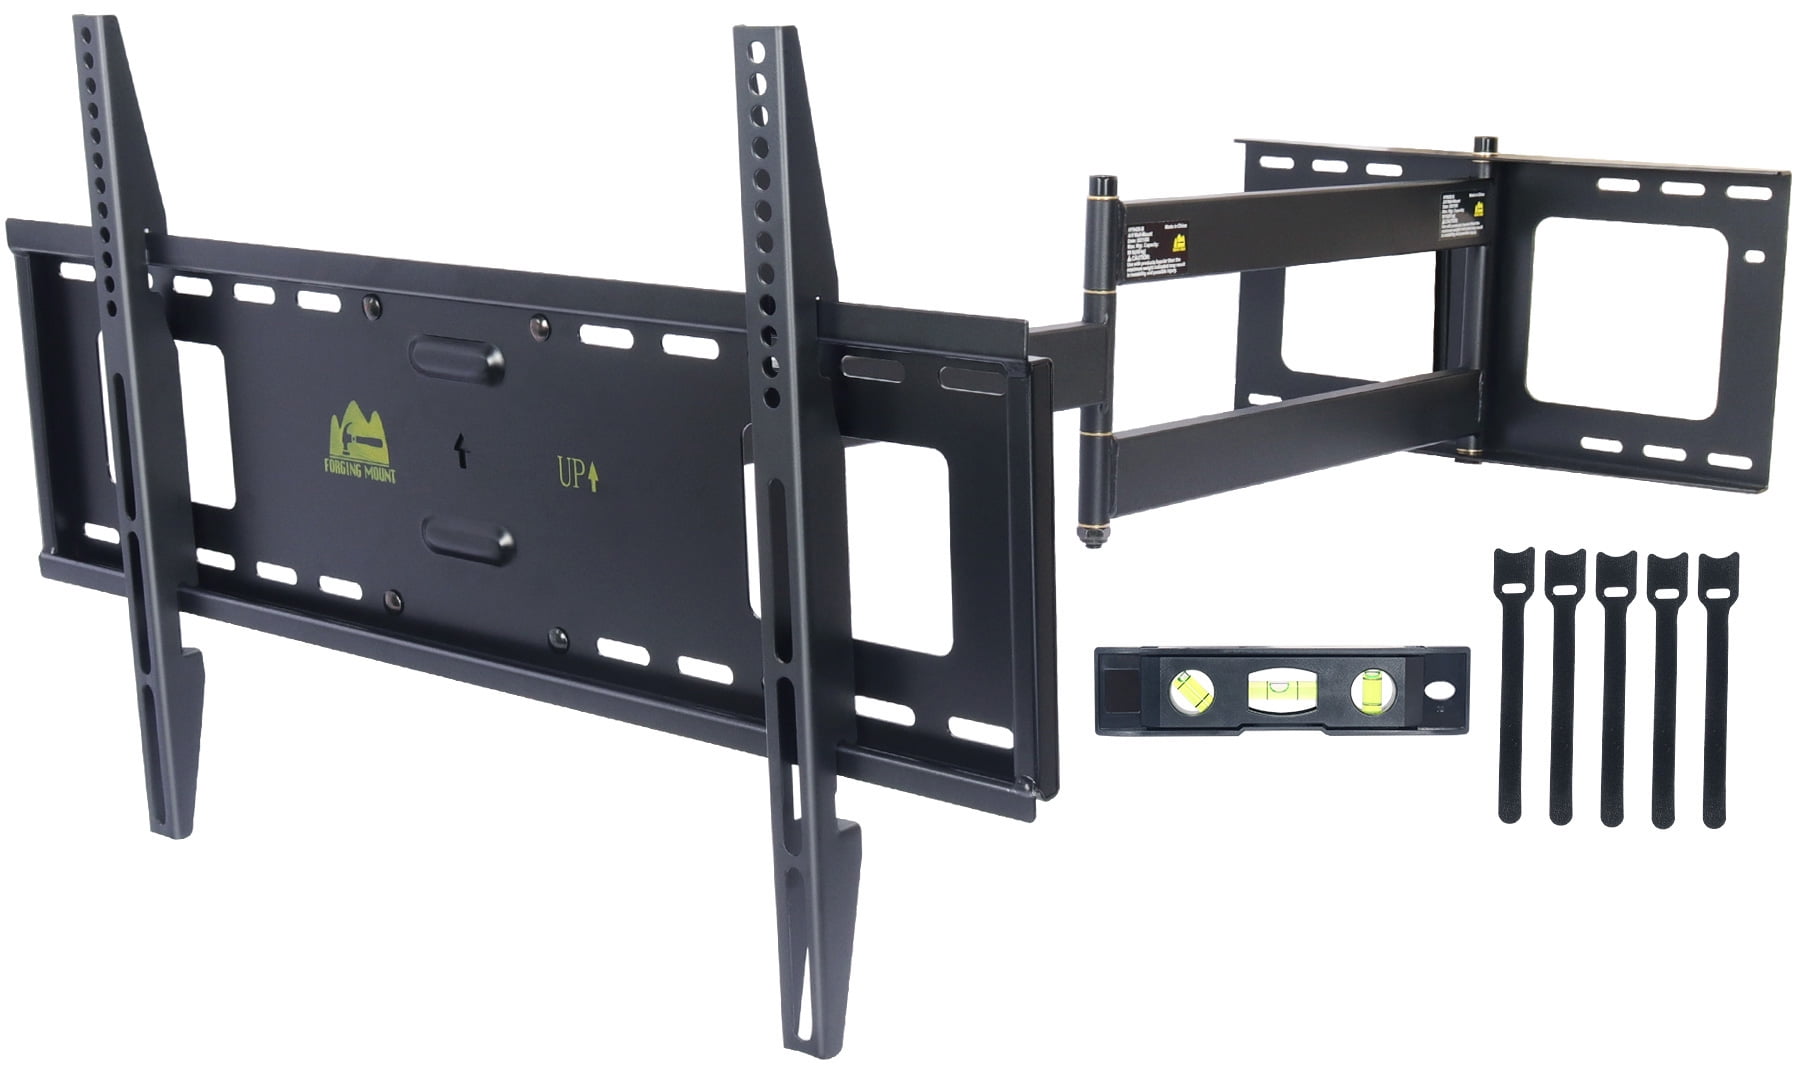 FORGING MOUNT Long Arm TV Mount Full Motion TV Bracket with 42 inch Long Extension Articulating TV Wall Mount for 37 to 80 Inch Flat/Curve TVs VESA 600x400mm Compatible Holds up to 100 lbs 